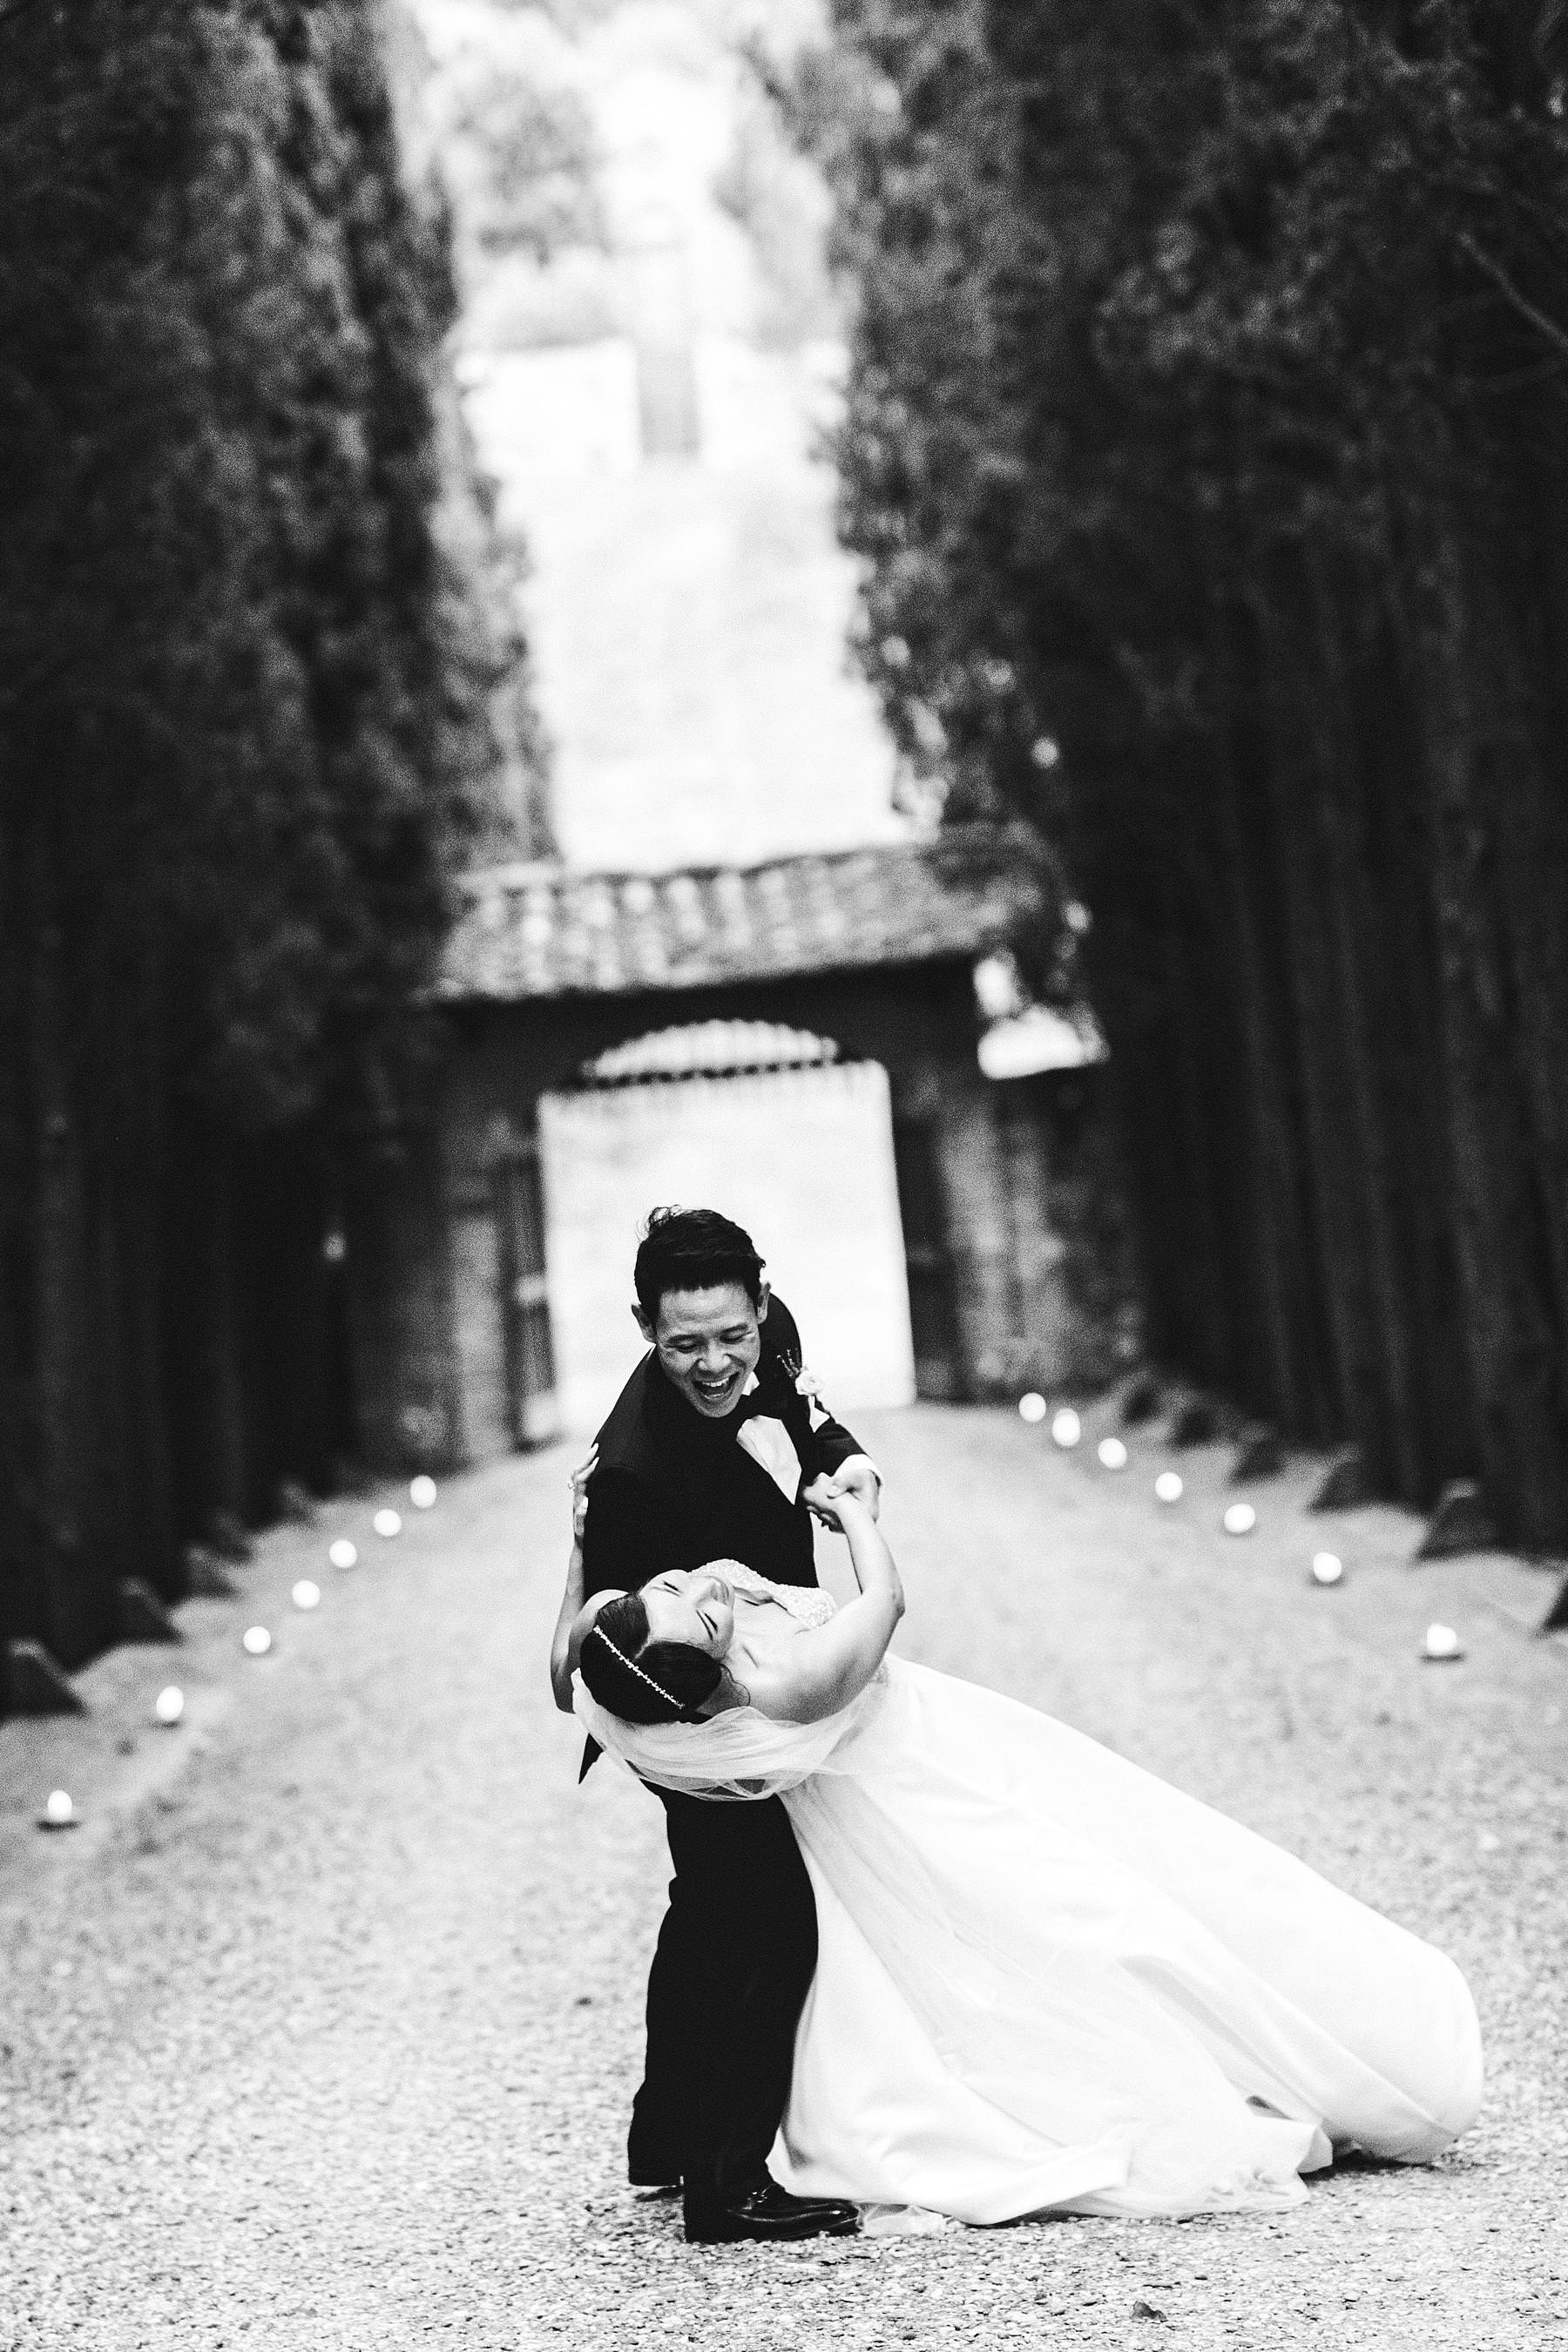 Lovely bride and groom wedding photo at Castello Il Palagio venue in the countryside of Tuscany near Chianti. Intimate castle wedding in Italy